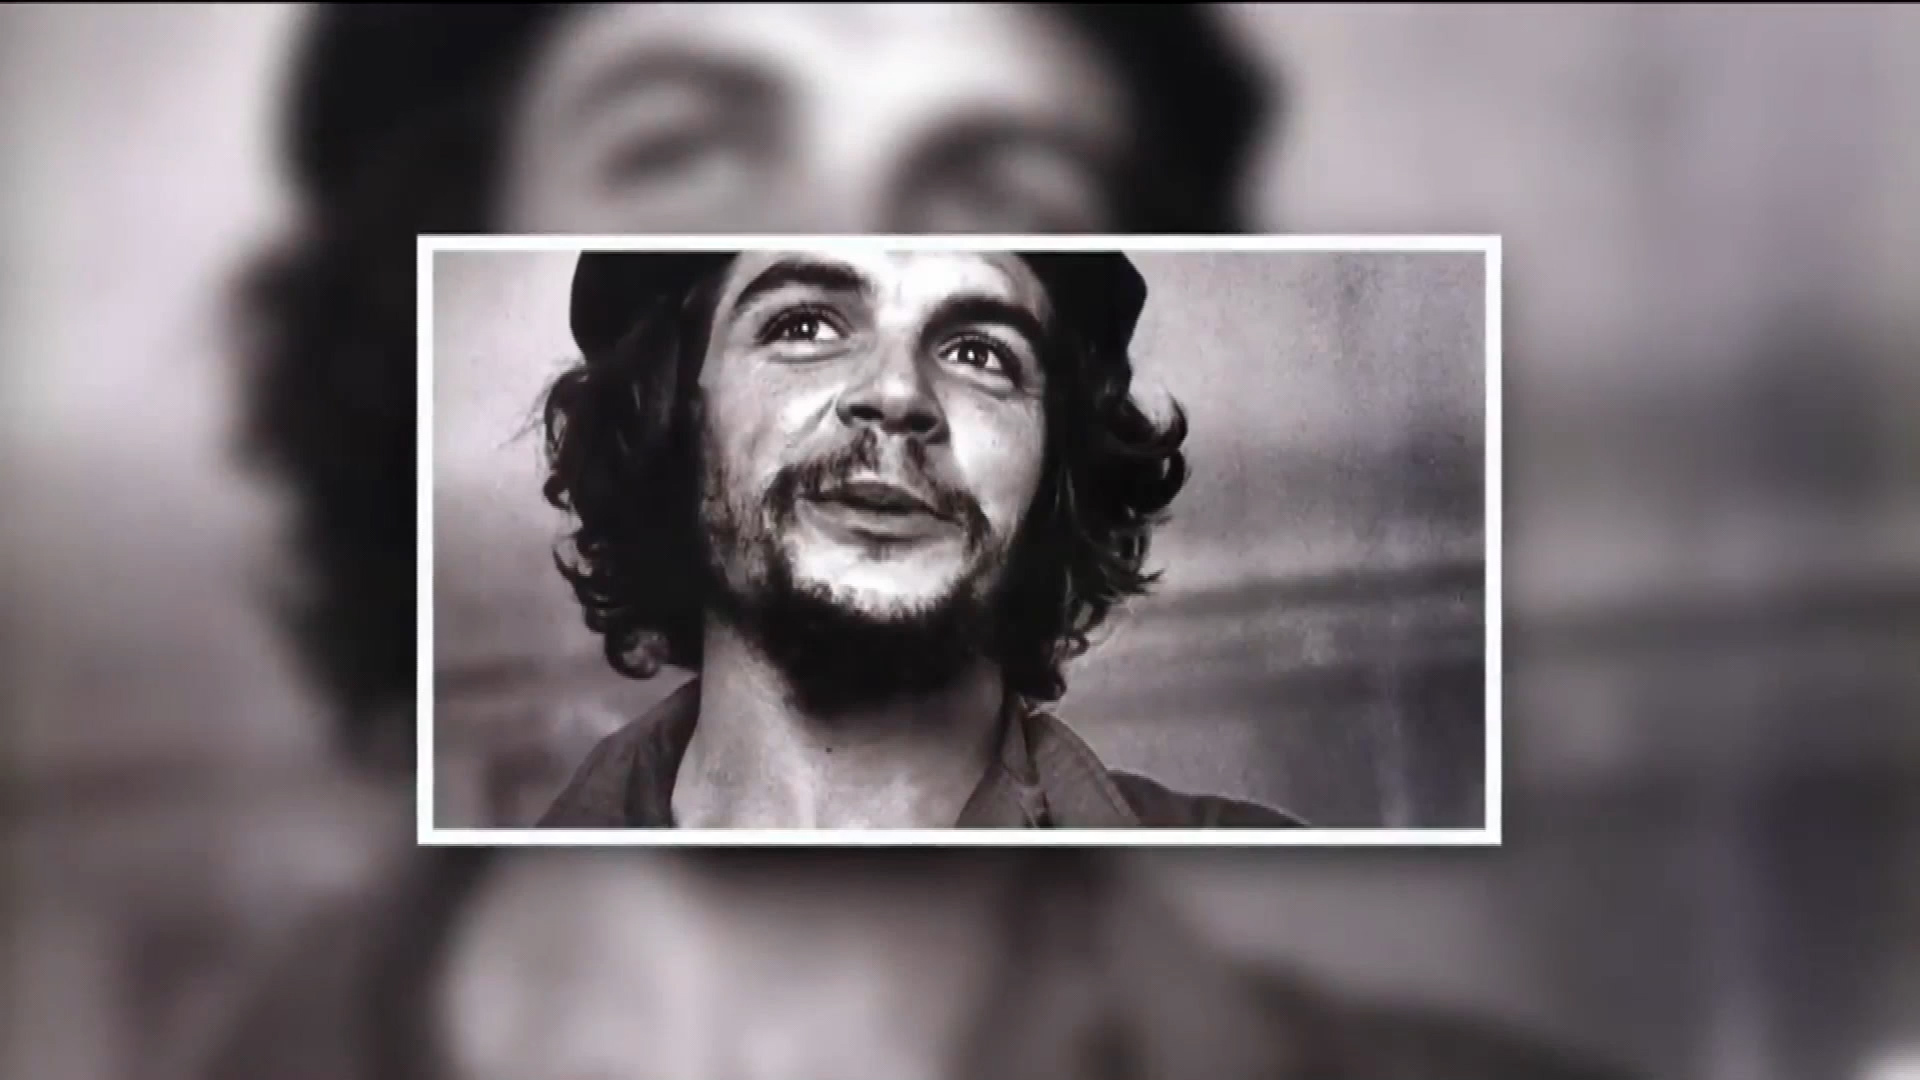 This Week on Americas Now: Remembering Che